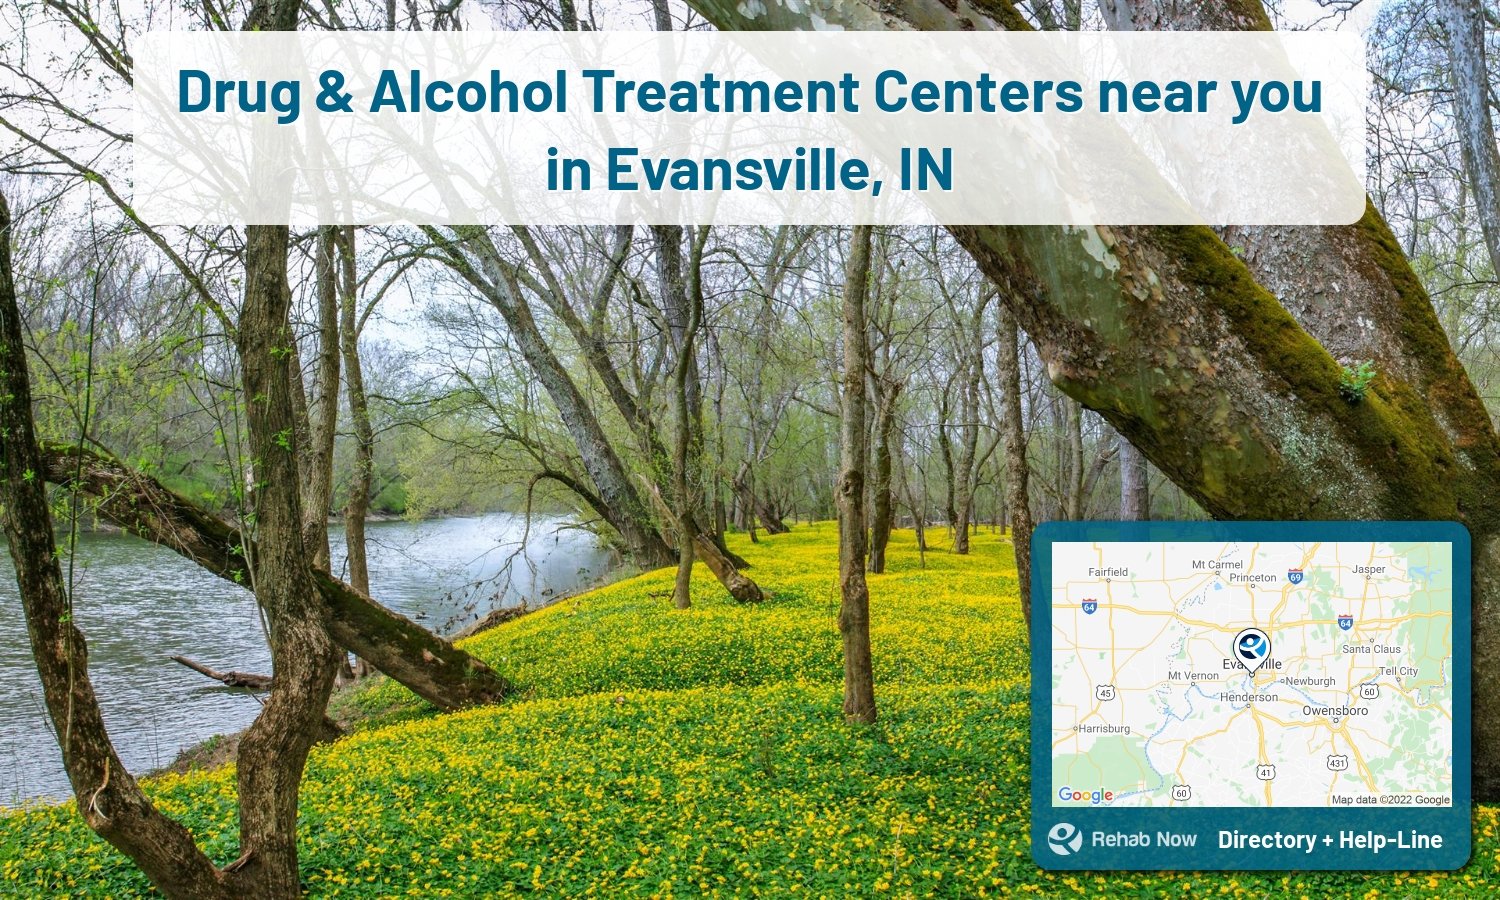 Evansville, IN Treatment Centers. Find drug rehab in Evansville, Indiana, or detox and treatment programs. Get the right help now!